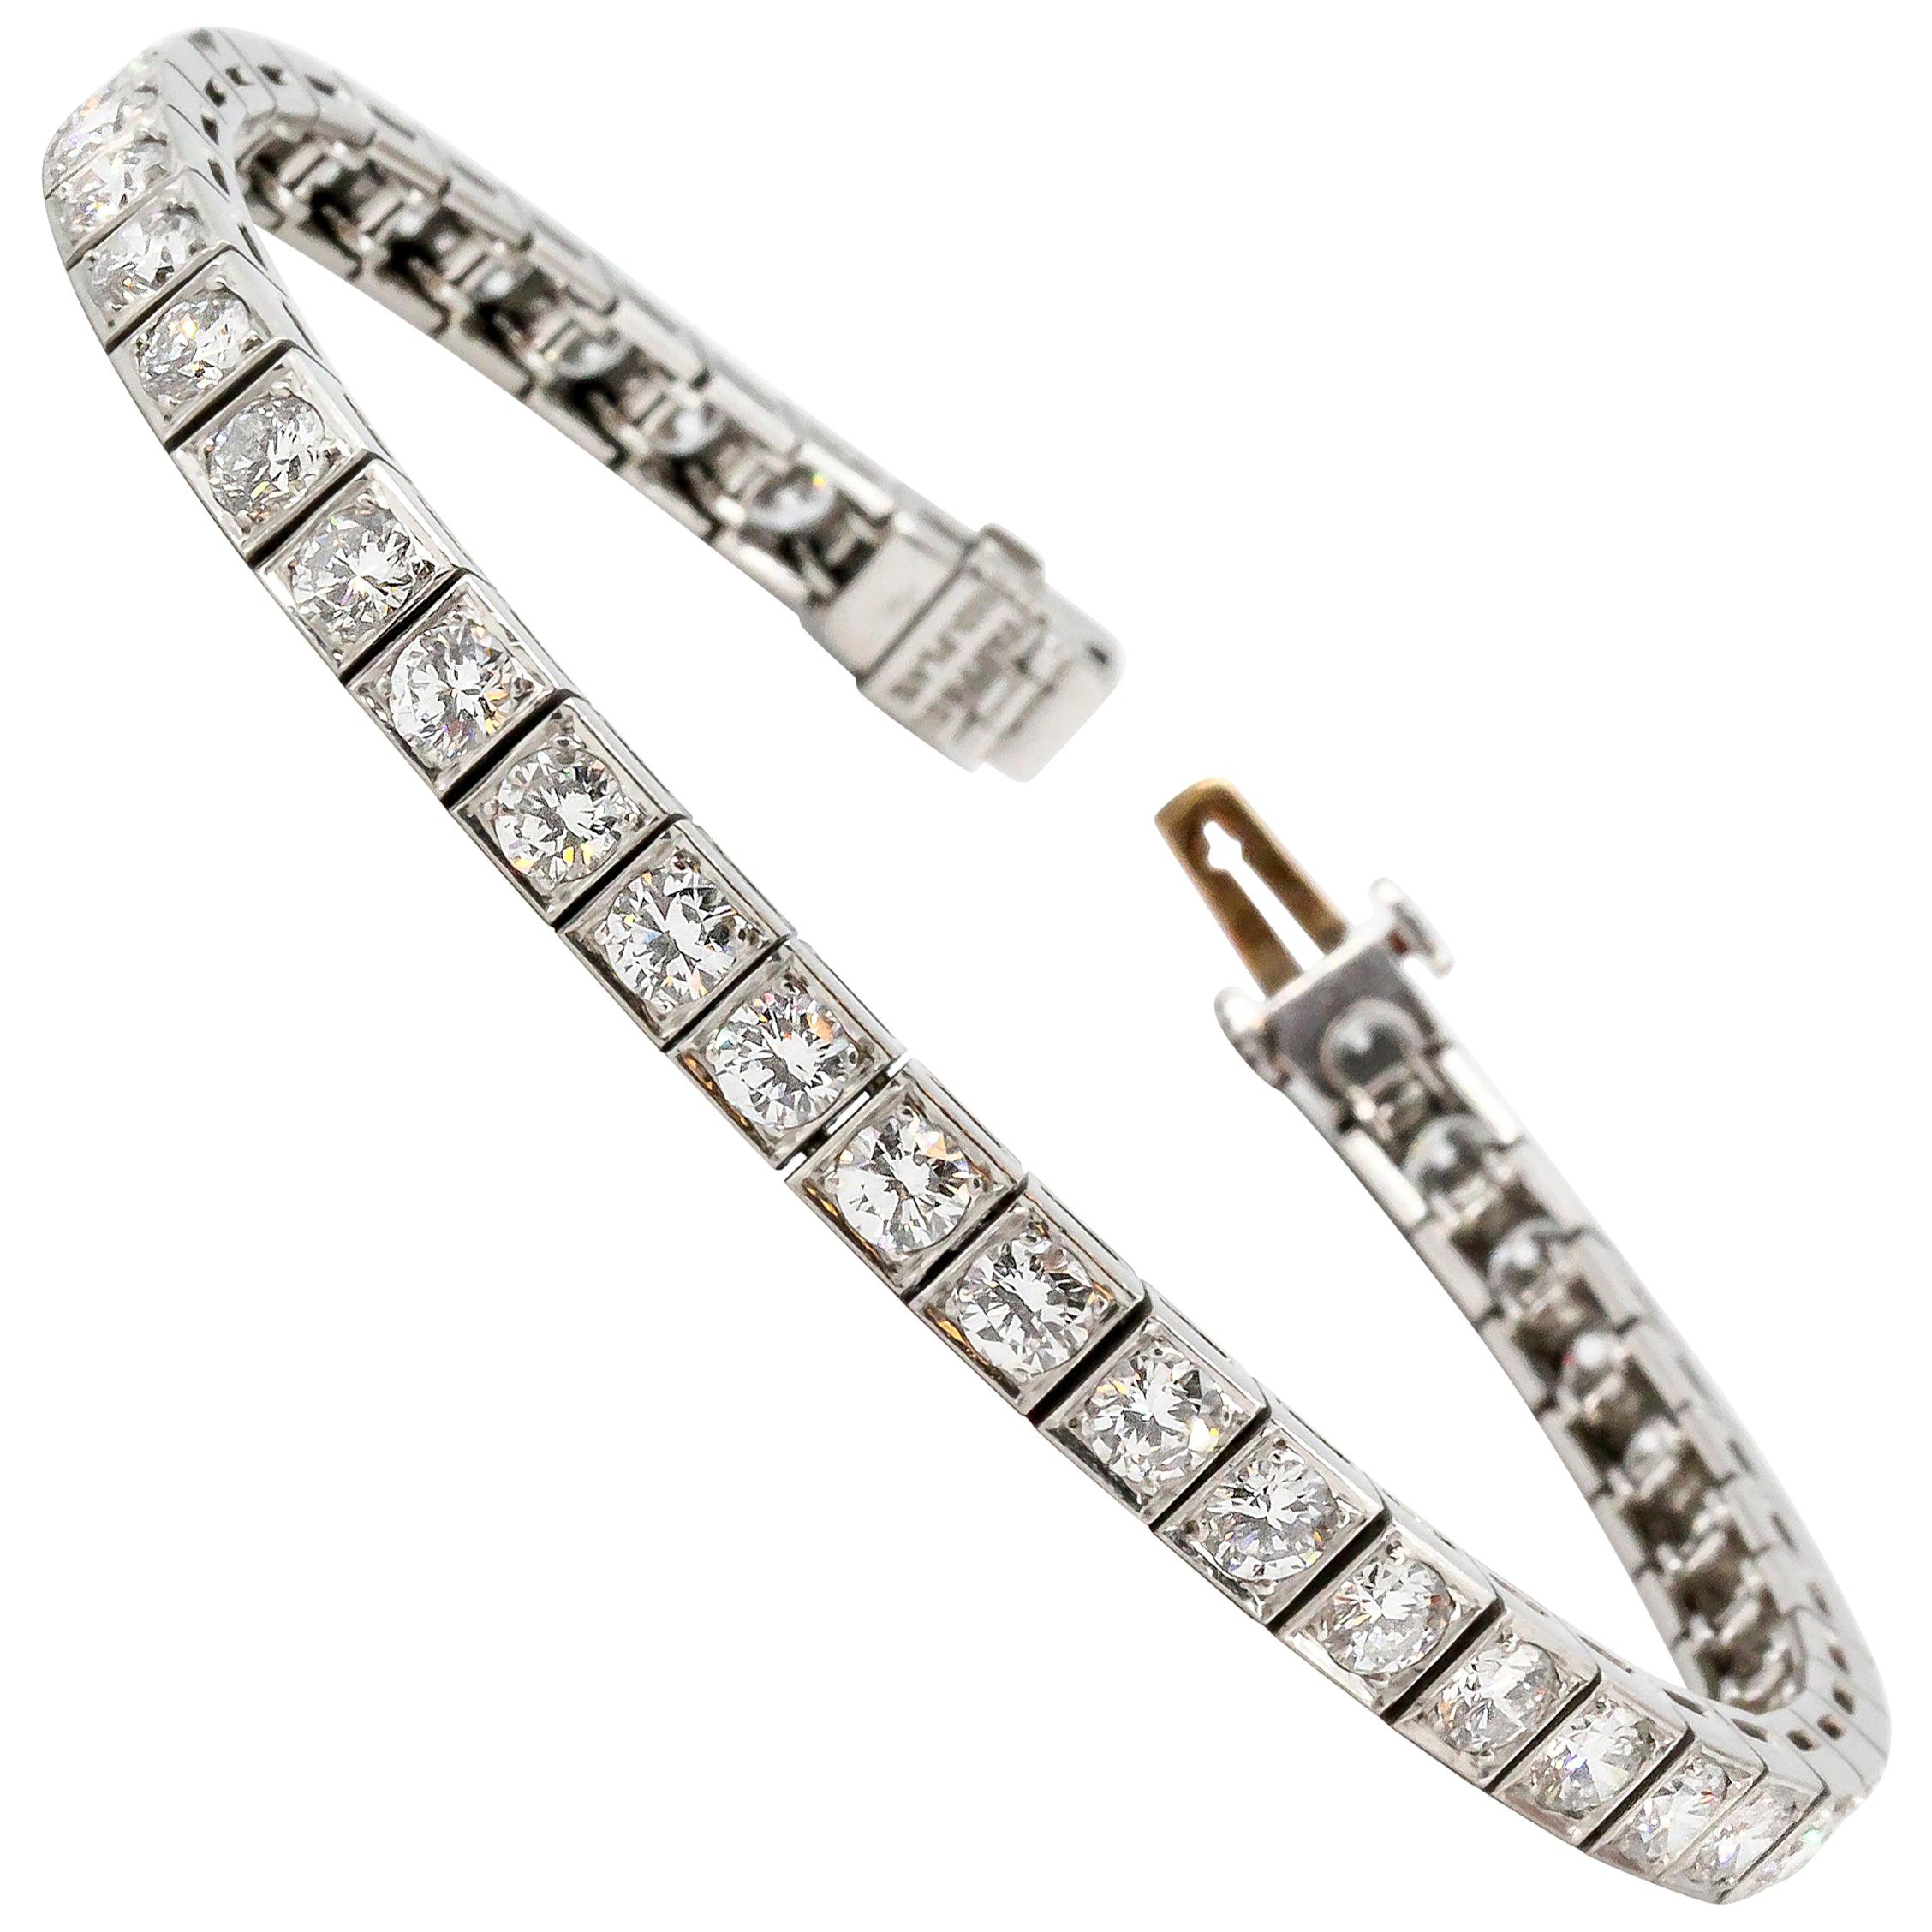 Tennis Bracelet in Sterling Silver and CZ Stunning Over 7.0cts 